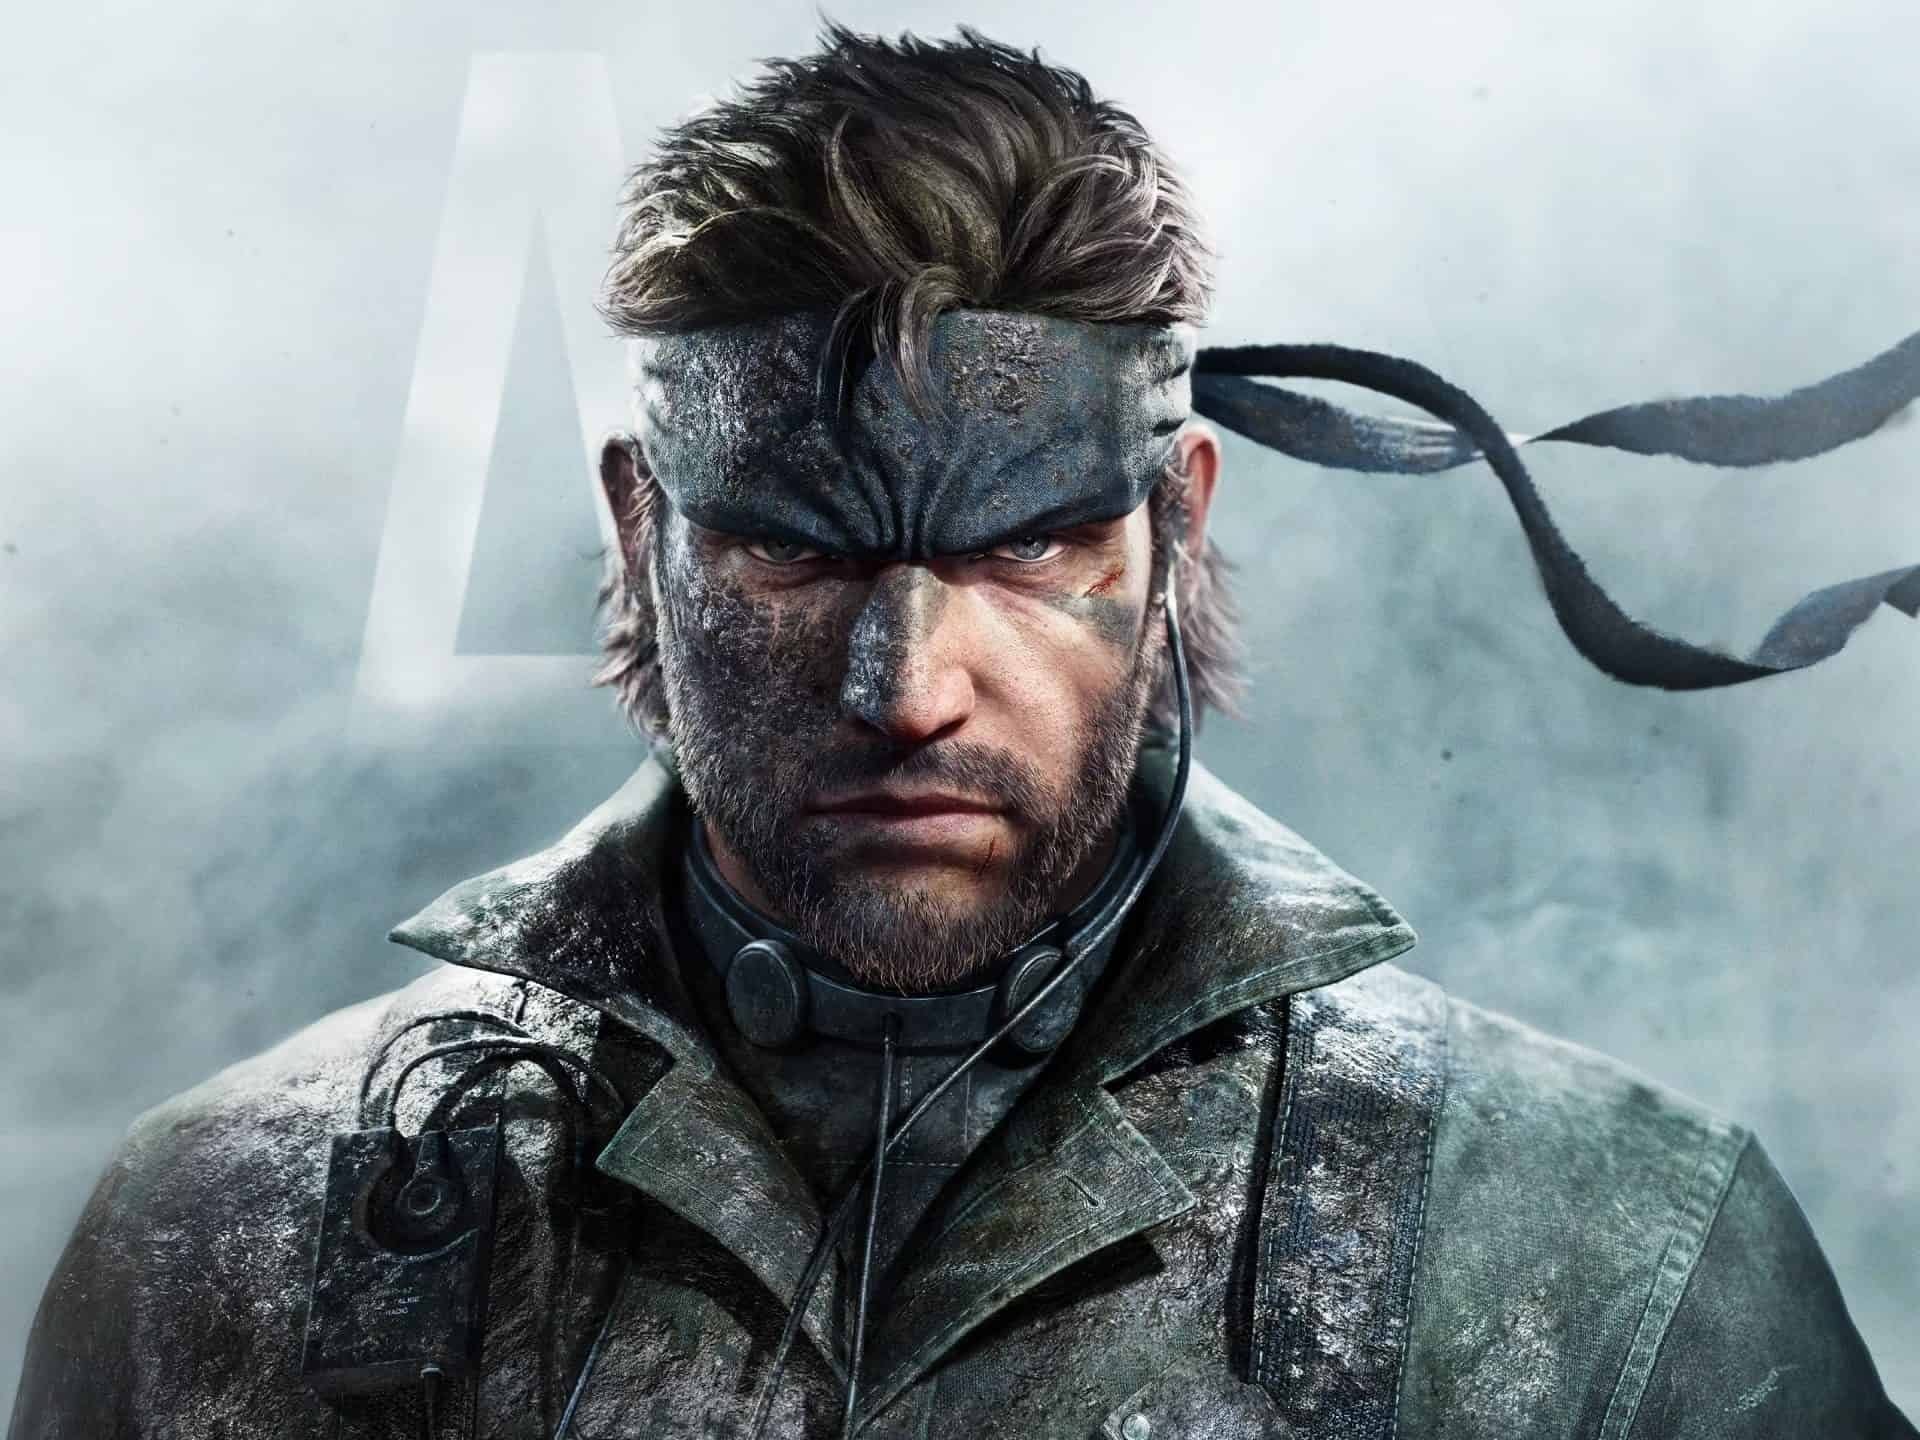 Metal Gear Solid 3 Remake Will Fully Protect Structure in Original Game